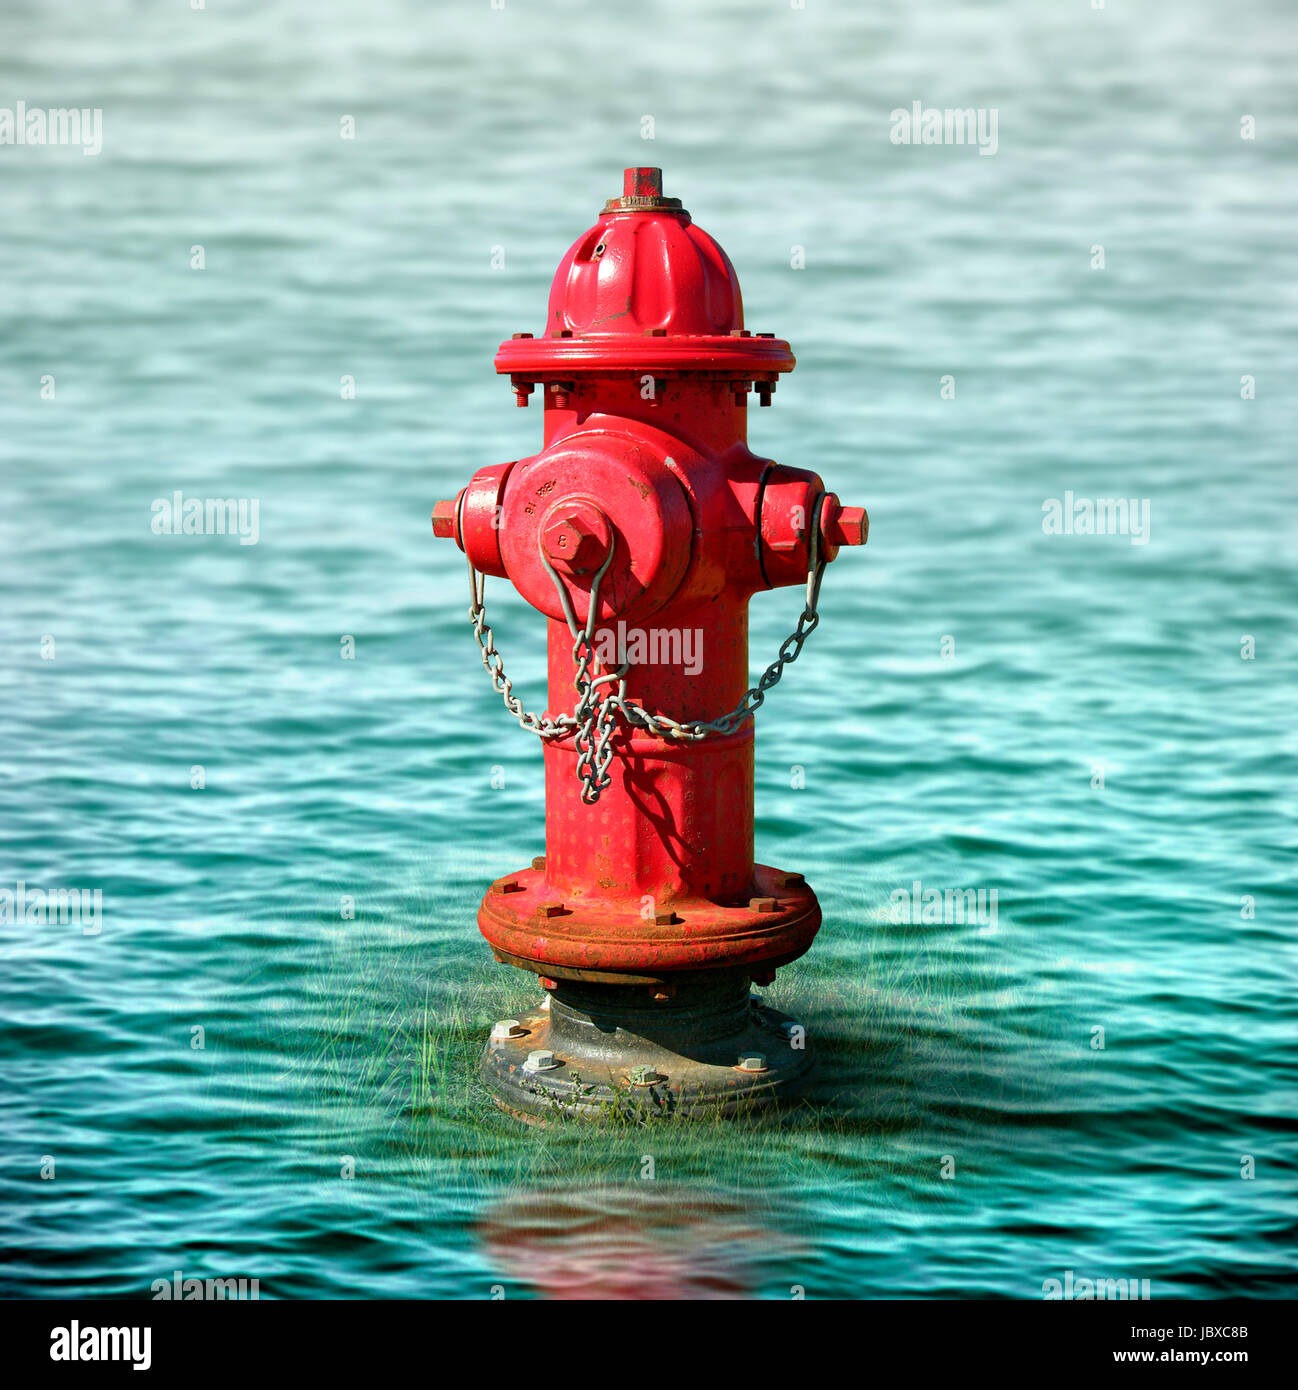 Photo illustration of a fire hydrant surrounded by flood waters. Stock Photo